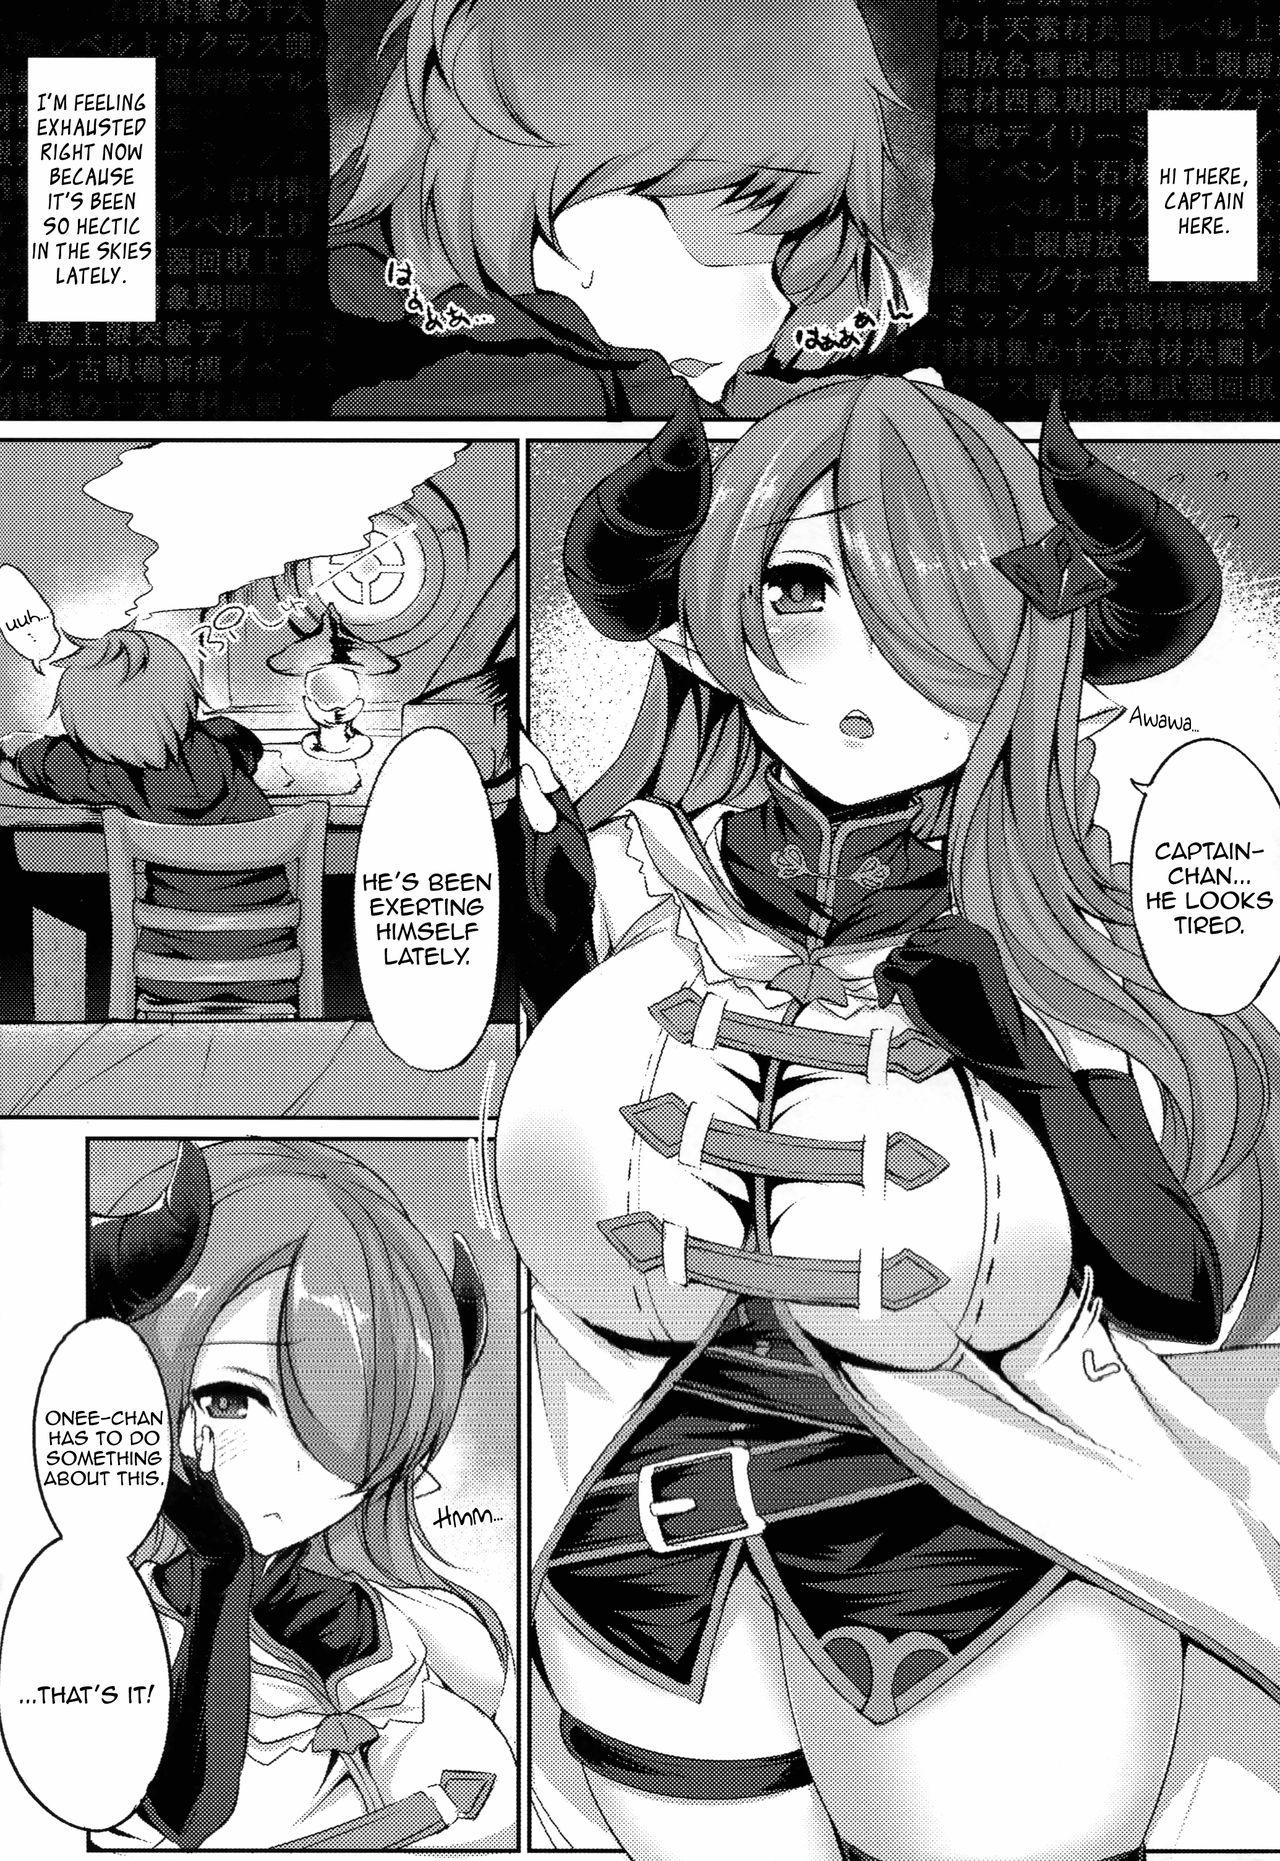 (C94) [BENIKURAGE (circussion)] Captain-chan! You Look so Tired Today, How About a Special Massage From Onee-san? (Granblue Fantasy) [English] [Aoitenshi] 4